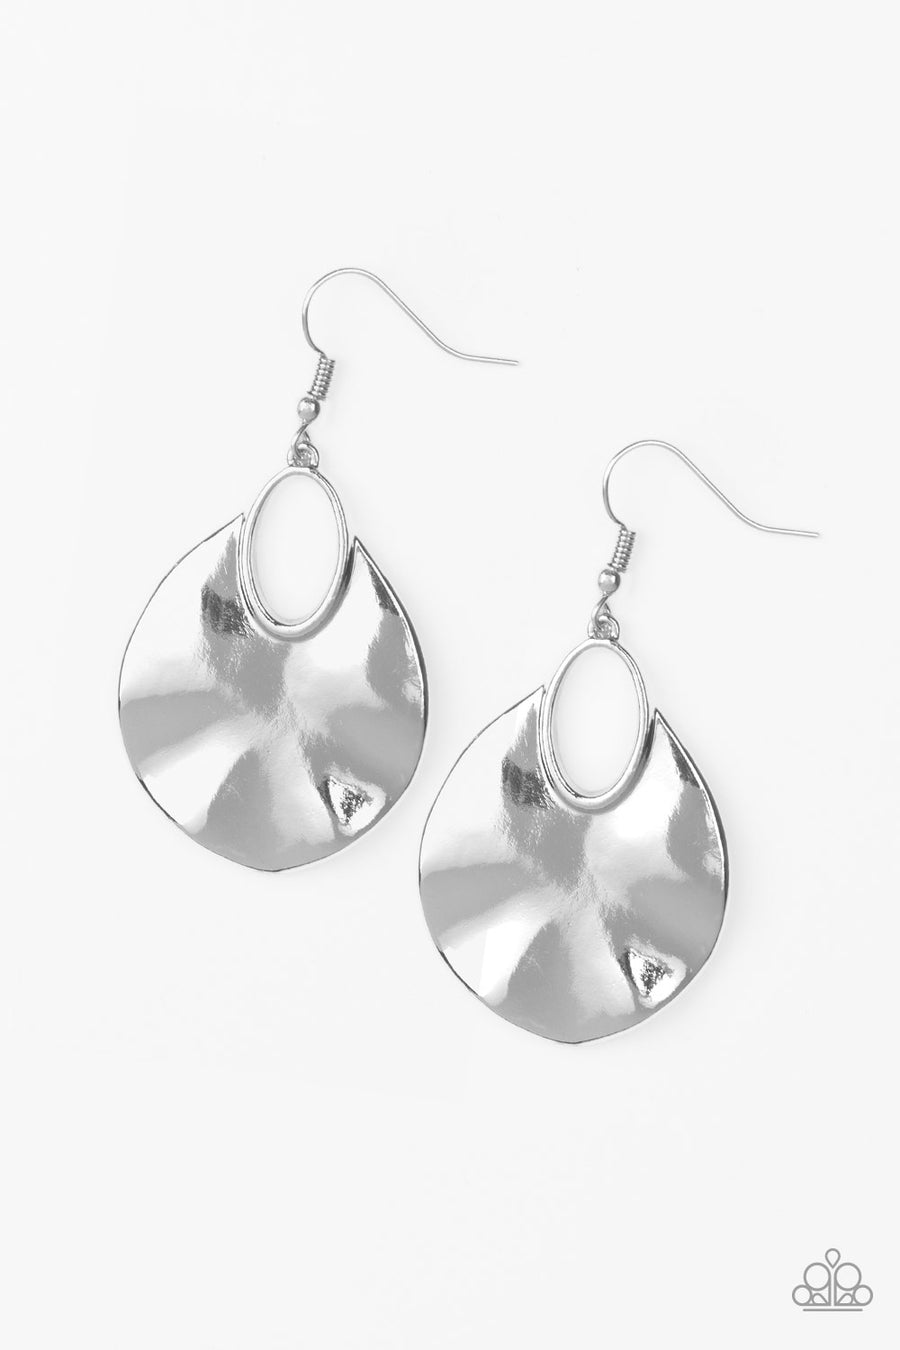 Ruffled Refinery  - Silver Oval Hammered Earrings  - Paparazzi Accessories